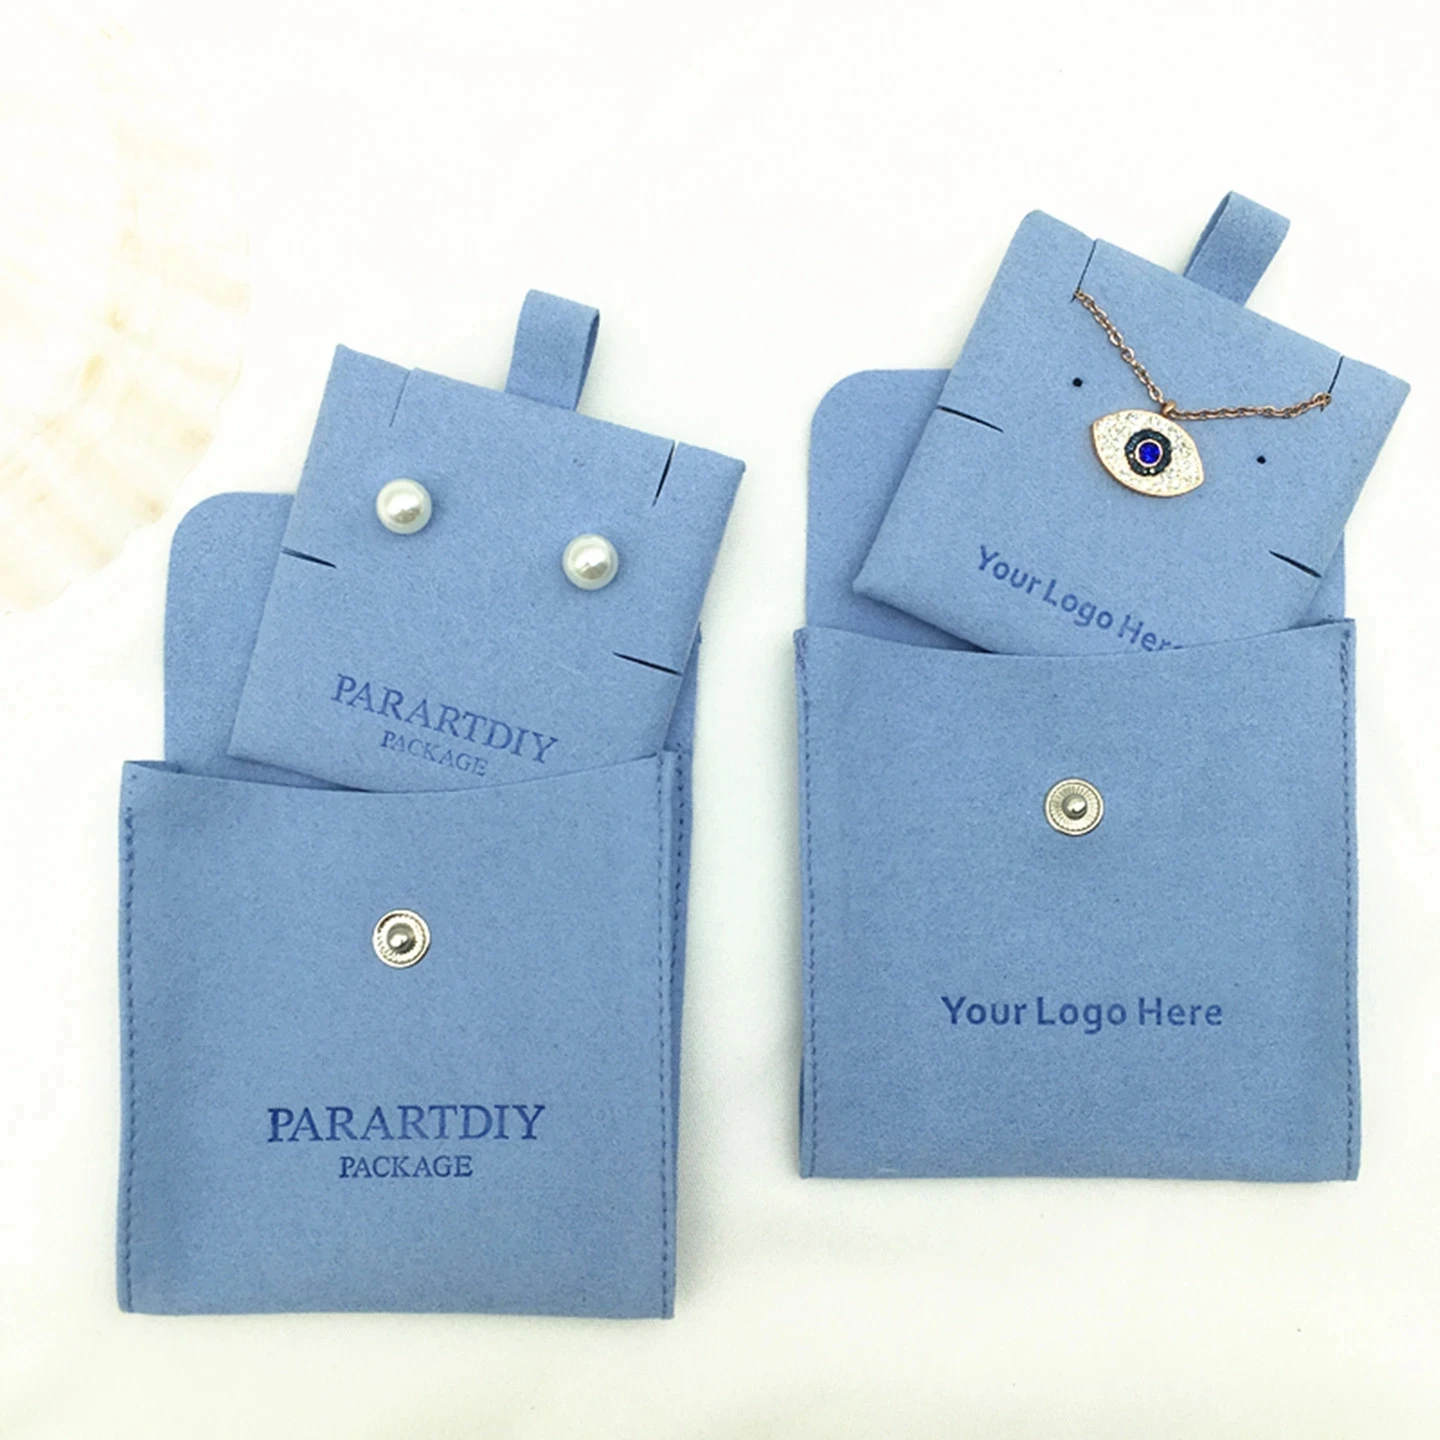 50 sets of blue personalized jewelry packaging bags custom logo button bag fashion small envelope bag necklace clip microfiber